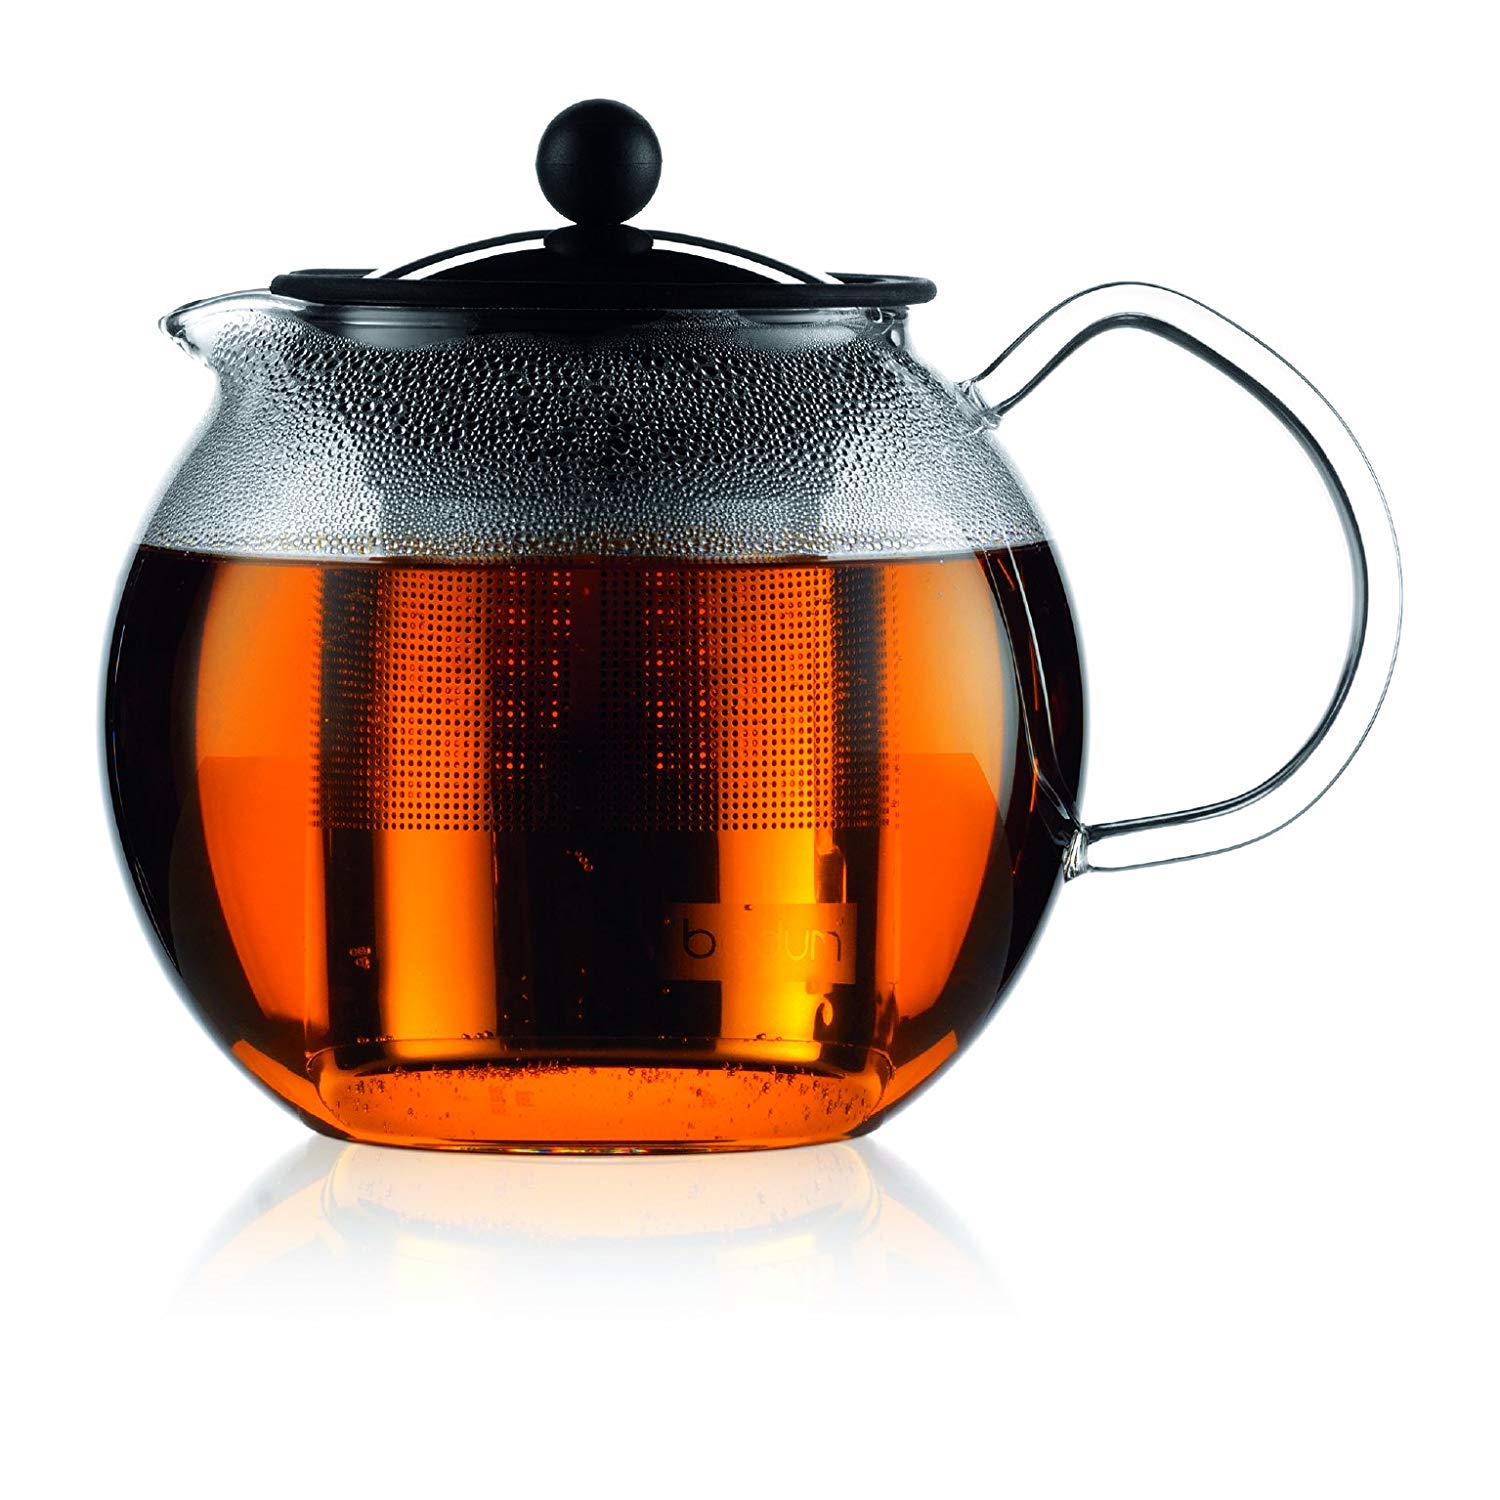 Teapot with infuser basket for loose tea